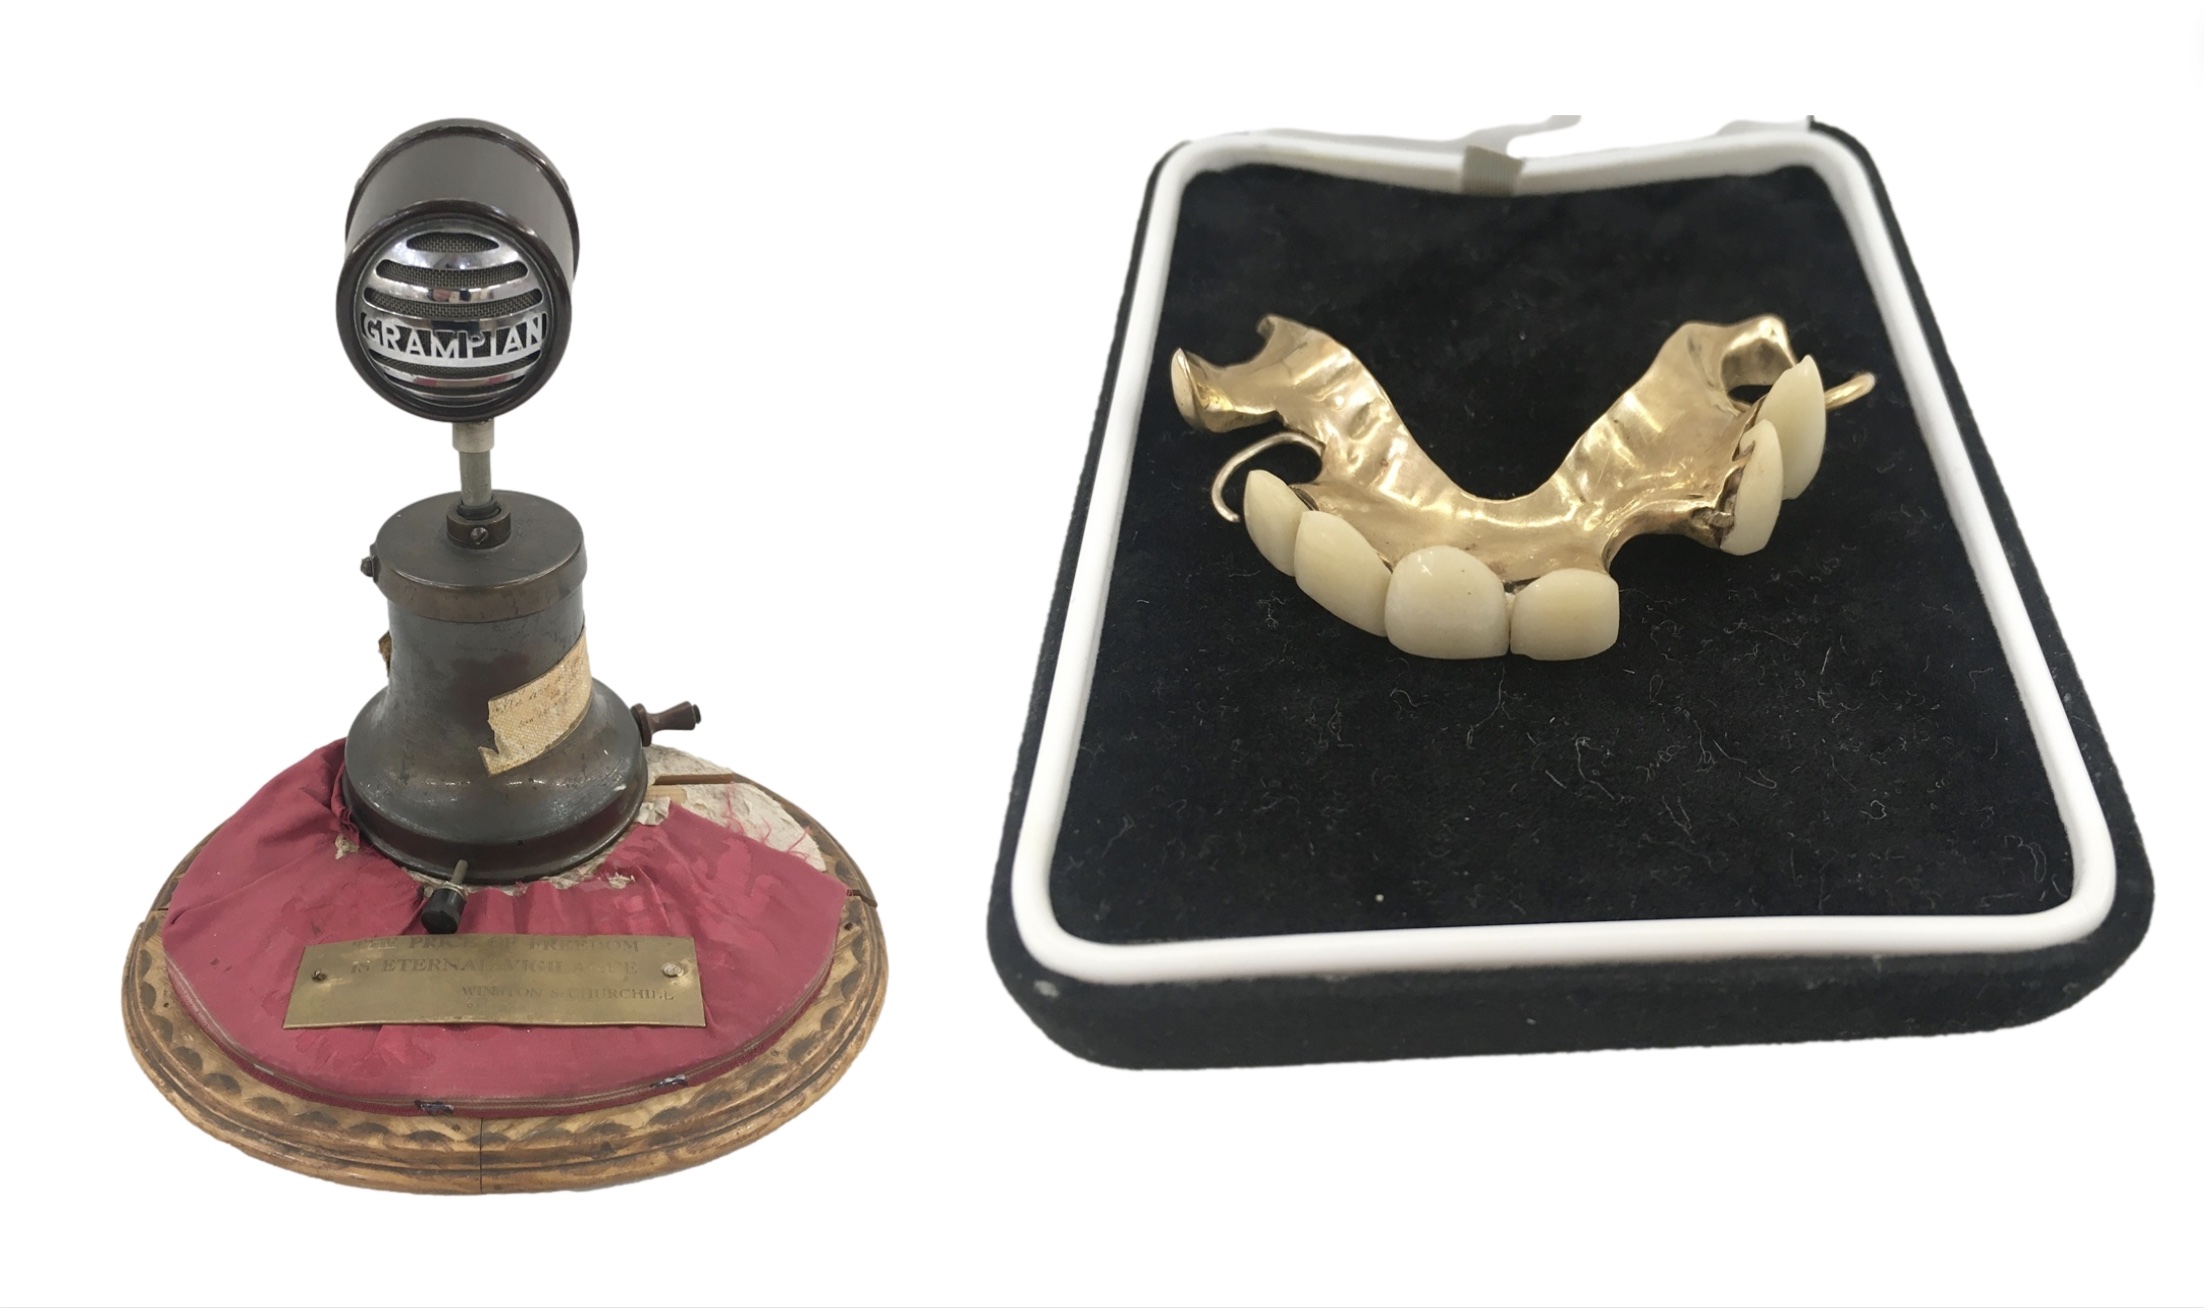 Winston Churchill’s false teeth to get bidders biting – Antique Collecting